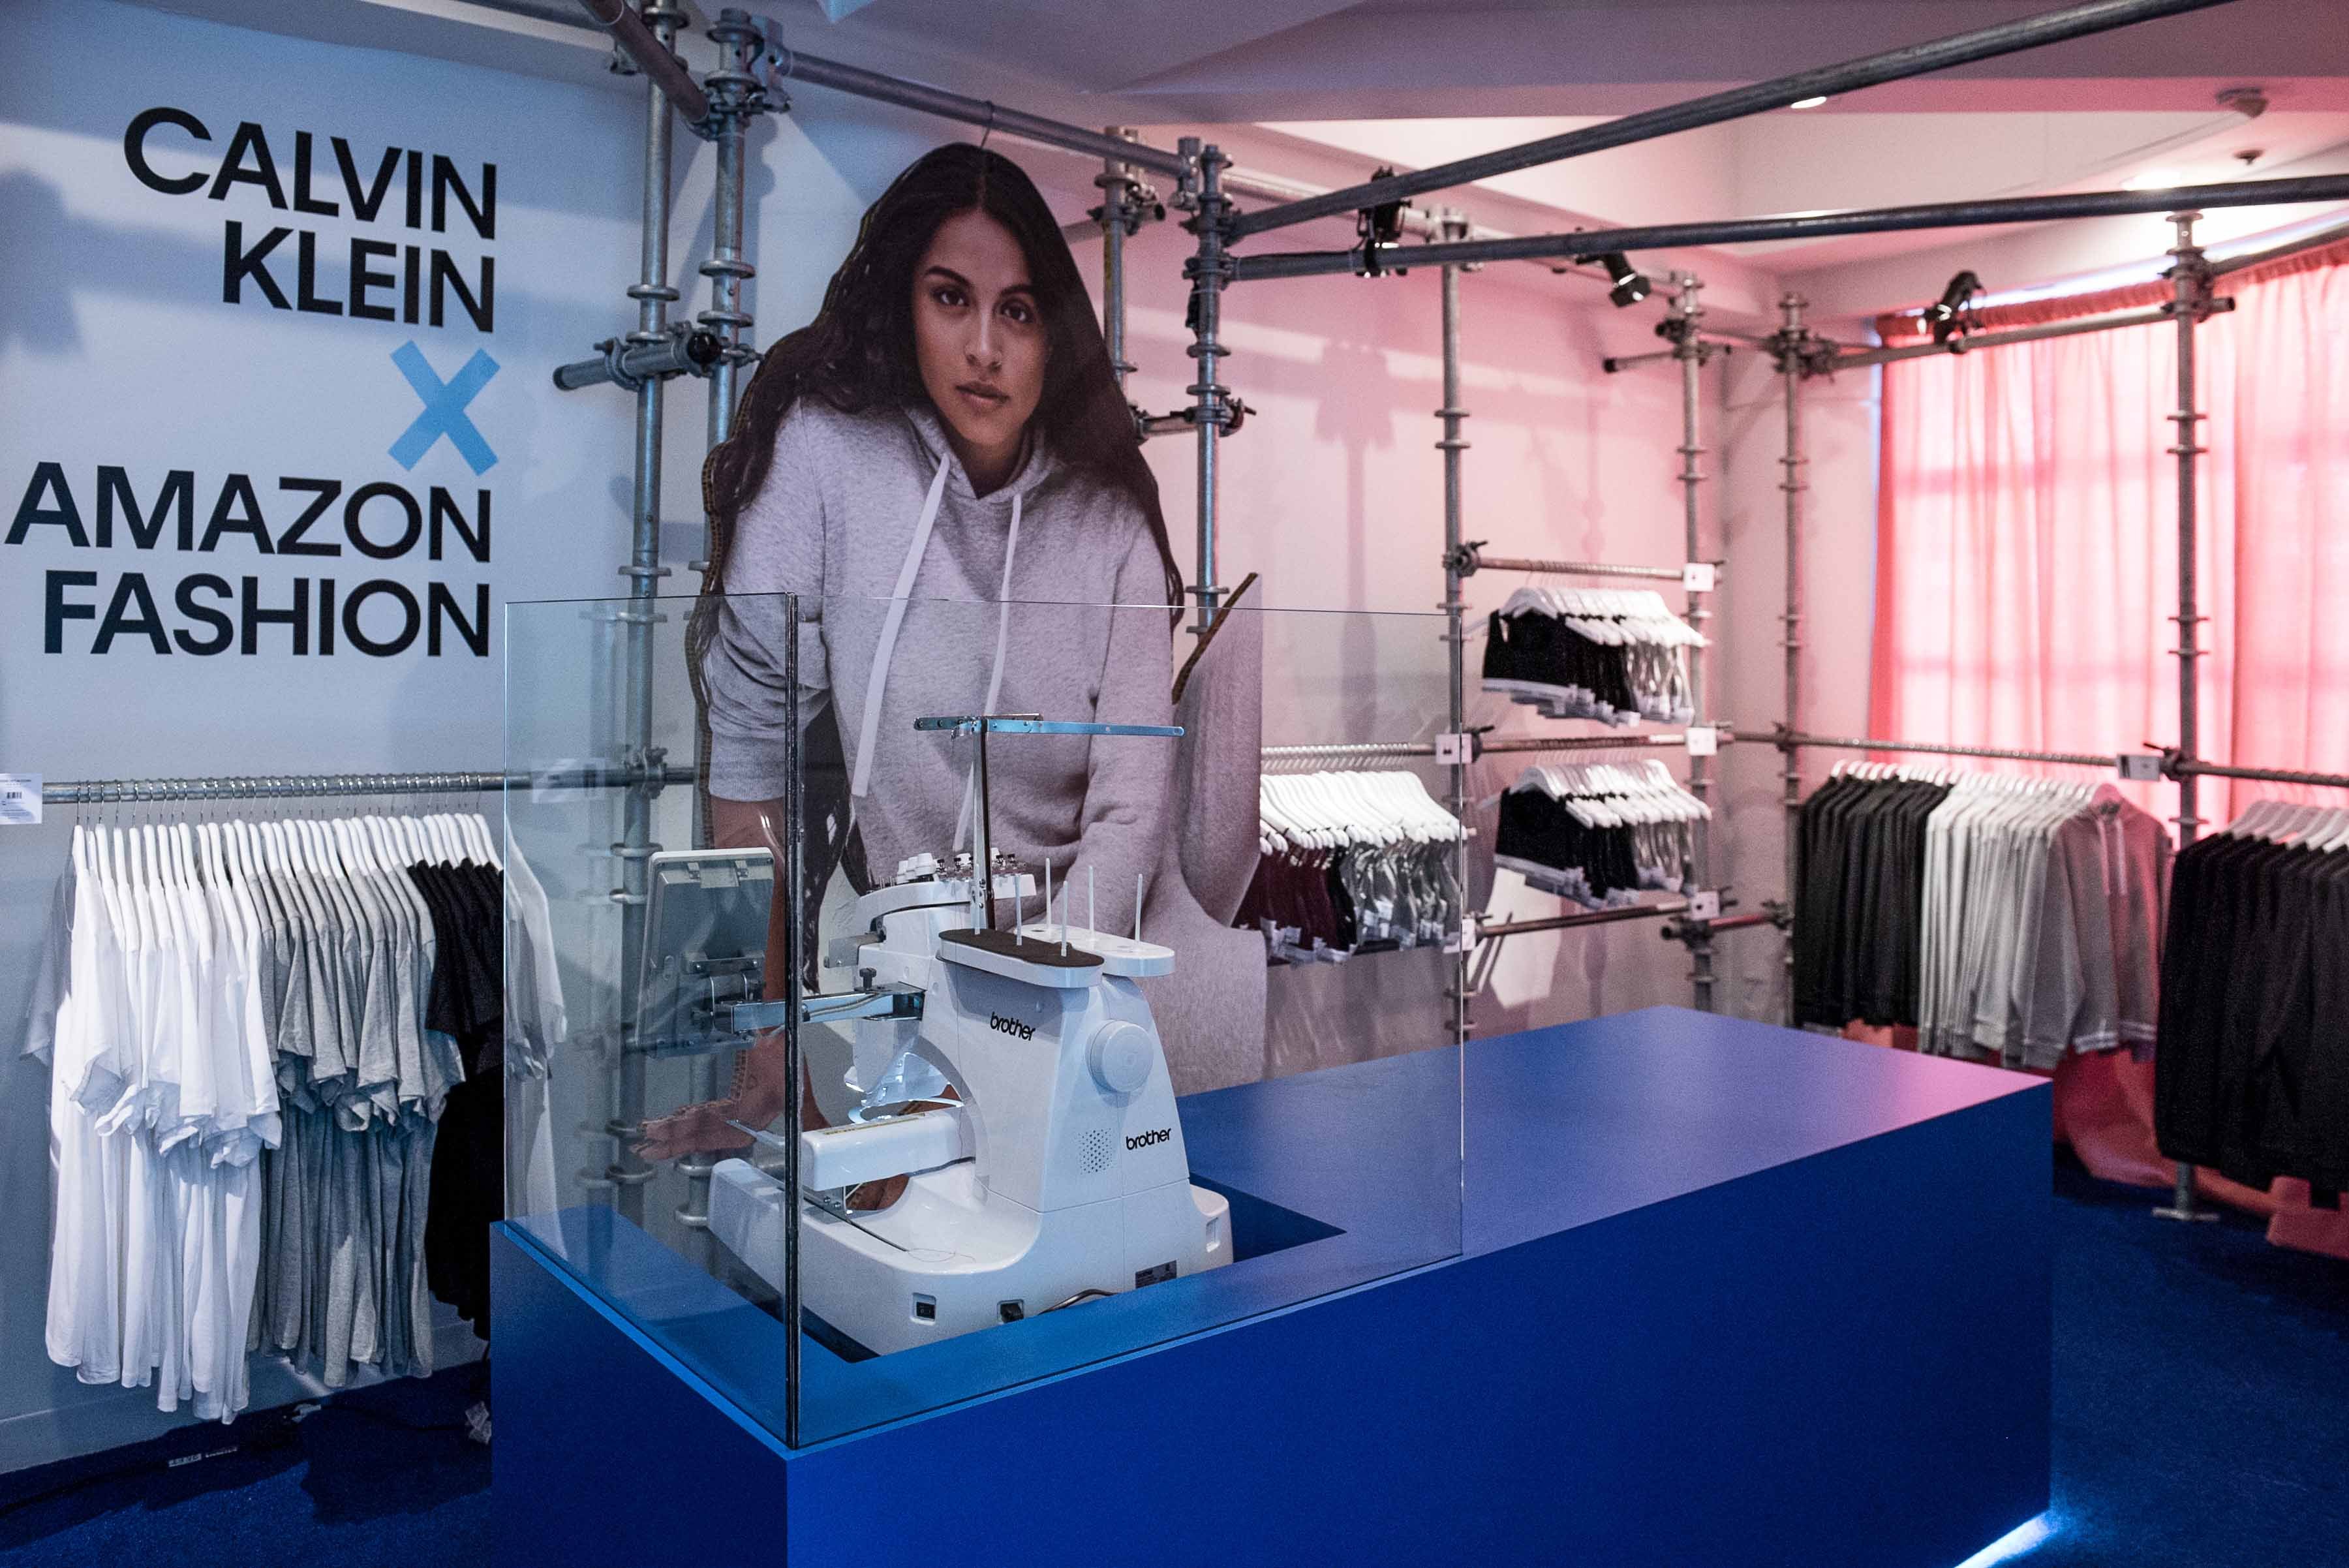 Calvin Klein, Inc. Announces Holiday Retail Experience with Amazon Fashion  | Business Wire